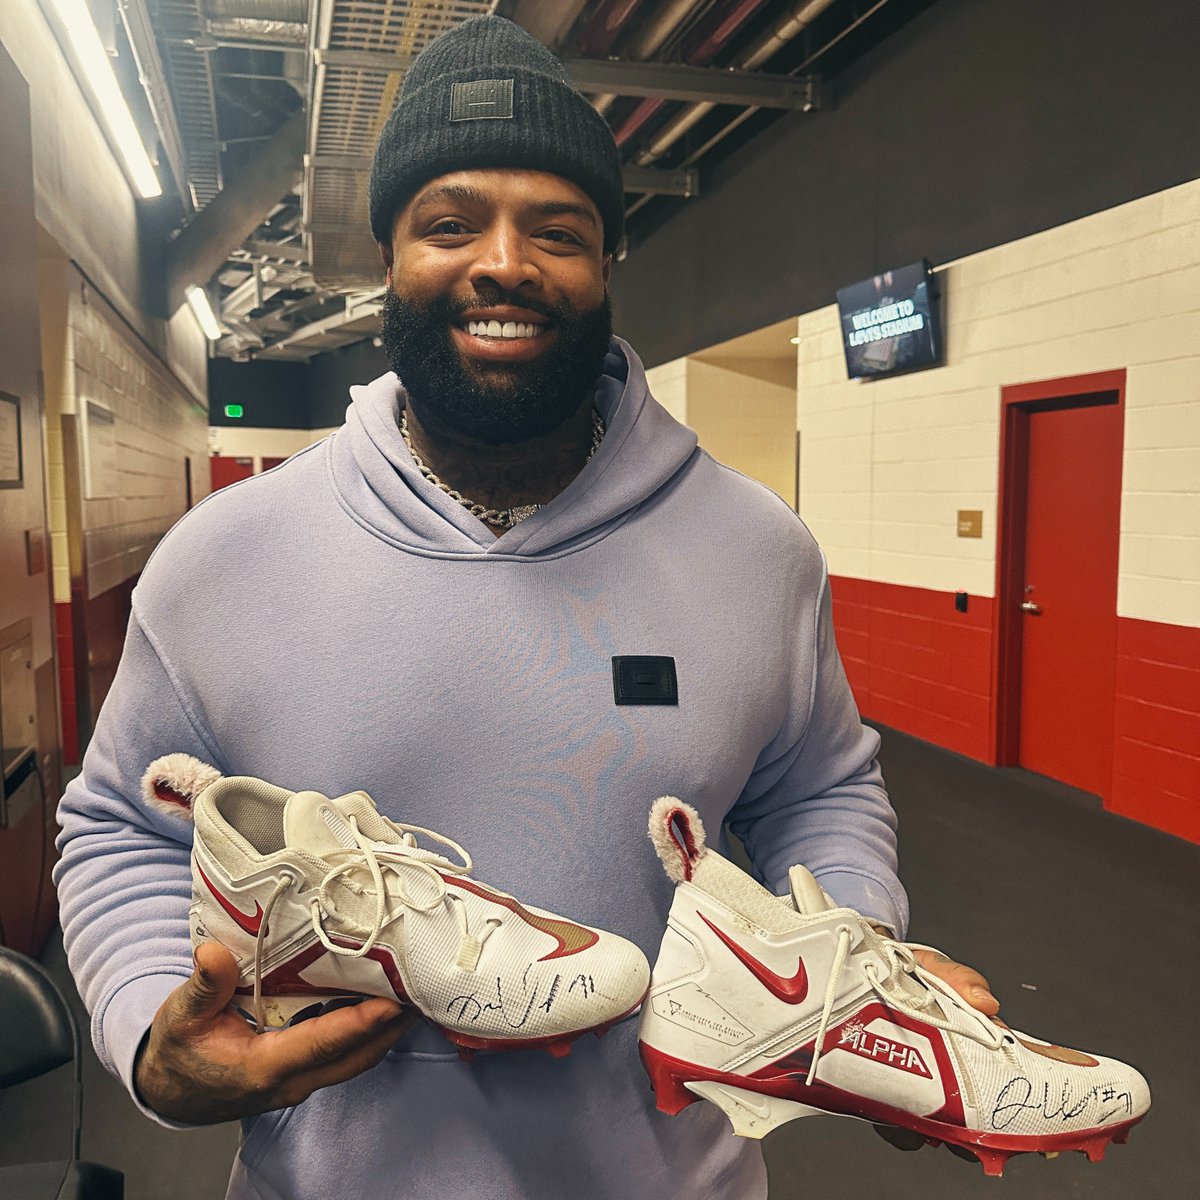 RT for a chance to win a pair of signed @TrentW71 cleats! #ProBowlVote No purchase necessary. Official rules: 49rs.co/3RSEUEP